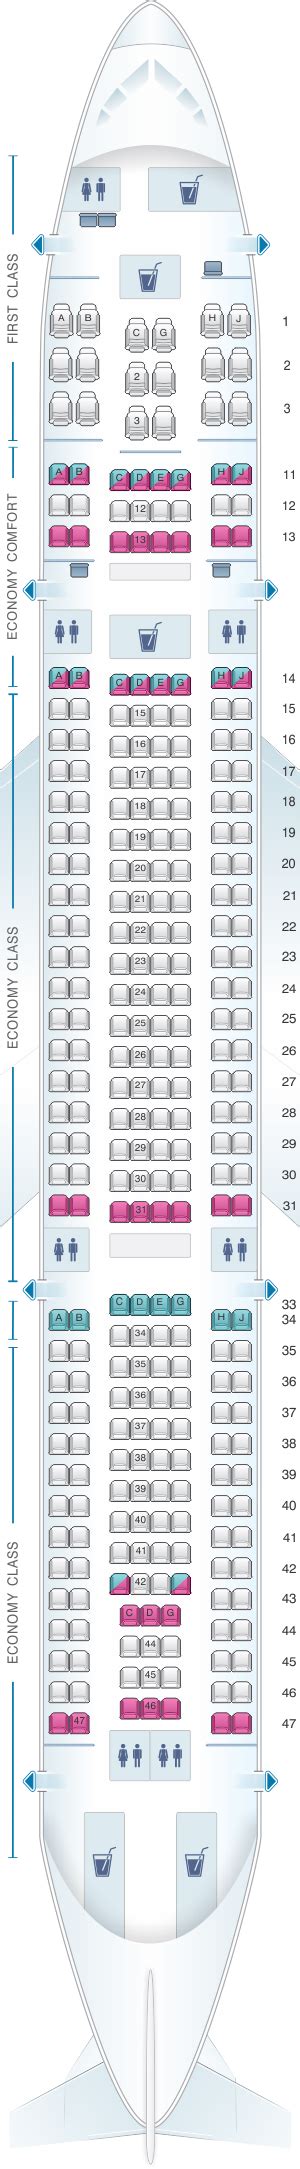 Hawaiian airlines airbus a330 seat map. Personal In-Seat Entertainment System. The ability to play, pause and select what you want, when you want. Guests on North American flights are invited to bring their own headset or earphones to enjoy the in-seat entertainment system. Earbuds are also available for purchase on-board for $4.00 and may be kept for use on future flights. 